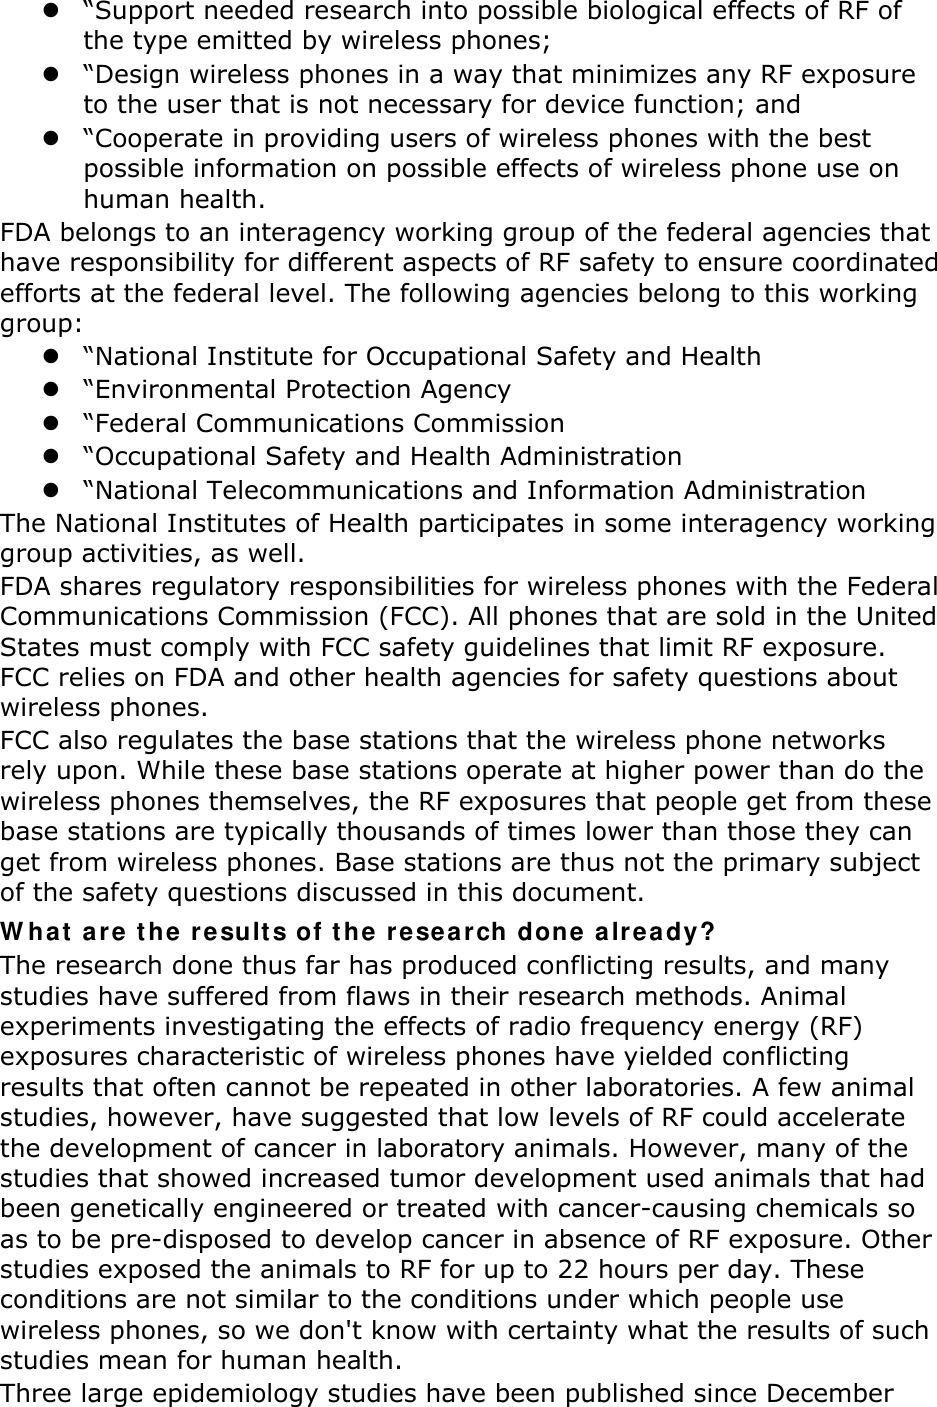  “Support needed research into possible biological effects of RF of the type emitted by wireless phones;  “Design wireless phones in a way that minimizes any RF exposure to the user that is not necessary for device function; and  “Cooperate in providing users of wireless phones with the best possible information on possible effects of wireless phone use on human health. FDA belongs to an interagency working group of the federal agencies that have responsibility for different aspects of RF safety to ensure coordinated efforts at the federal level. The following agencies belong to this working group:  “National Institute for Occupational Safety and Health  “Environmental Protection Agency  “Federal Communications Commission  “Occupational Safety and Health Administration  “National Telecommunications and Information Administration The National Institutes of Health participates in some interagency working group activities, as well. FDA shares regulatory responsibilities for wireless phones with the Federal Communications Commission (FCC). All phones that are sold in the United States must comply with FCC safety guidelines that limit RF exposure. FCC relies on FDA and other health agencies for safety questions about wireless phones. FCC also regulates the base stations that the wireless phone networks rely upon. While these base stations operate at higher power than do the wireless phones themselves, the RF exposures that people get from these base stations are typically thousands of times lower than those they can get from wireless phones. Base stations are thus not the primary subject of the safety questions discussed in this document. What are the results of the research done already? The research done thus far has produced conflicting results, and many studies have suffered from flaws in their research methods. Animal experiments investigating the effects of radio frequency energy (RF) exposures characteristic of wireless phones have yielded conflicting results that often cannot be repeated in other laboratories. A few animal studies, however, have suggested that low levels of RF could accelerate the development of cancer in laboratory animals. However, many of the studies that showed increased tumor development used animals that had been genetically engineered or treated with cancer-causing chemicals so as to be pre-disposed to develop cancer in absence of RF exposure. Other studies exposed the animals to RF for up to 22 hours per day. These conditions are not similar to the conditions under which people use wireless phones, so we don&apos;t know with certainty what the results of such studies mean for human health. Three large epidemiology studies have been published since December 